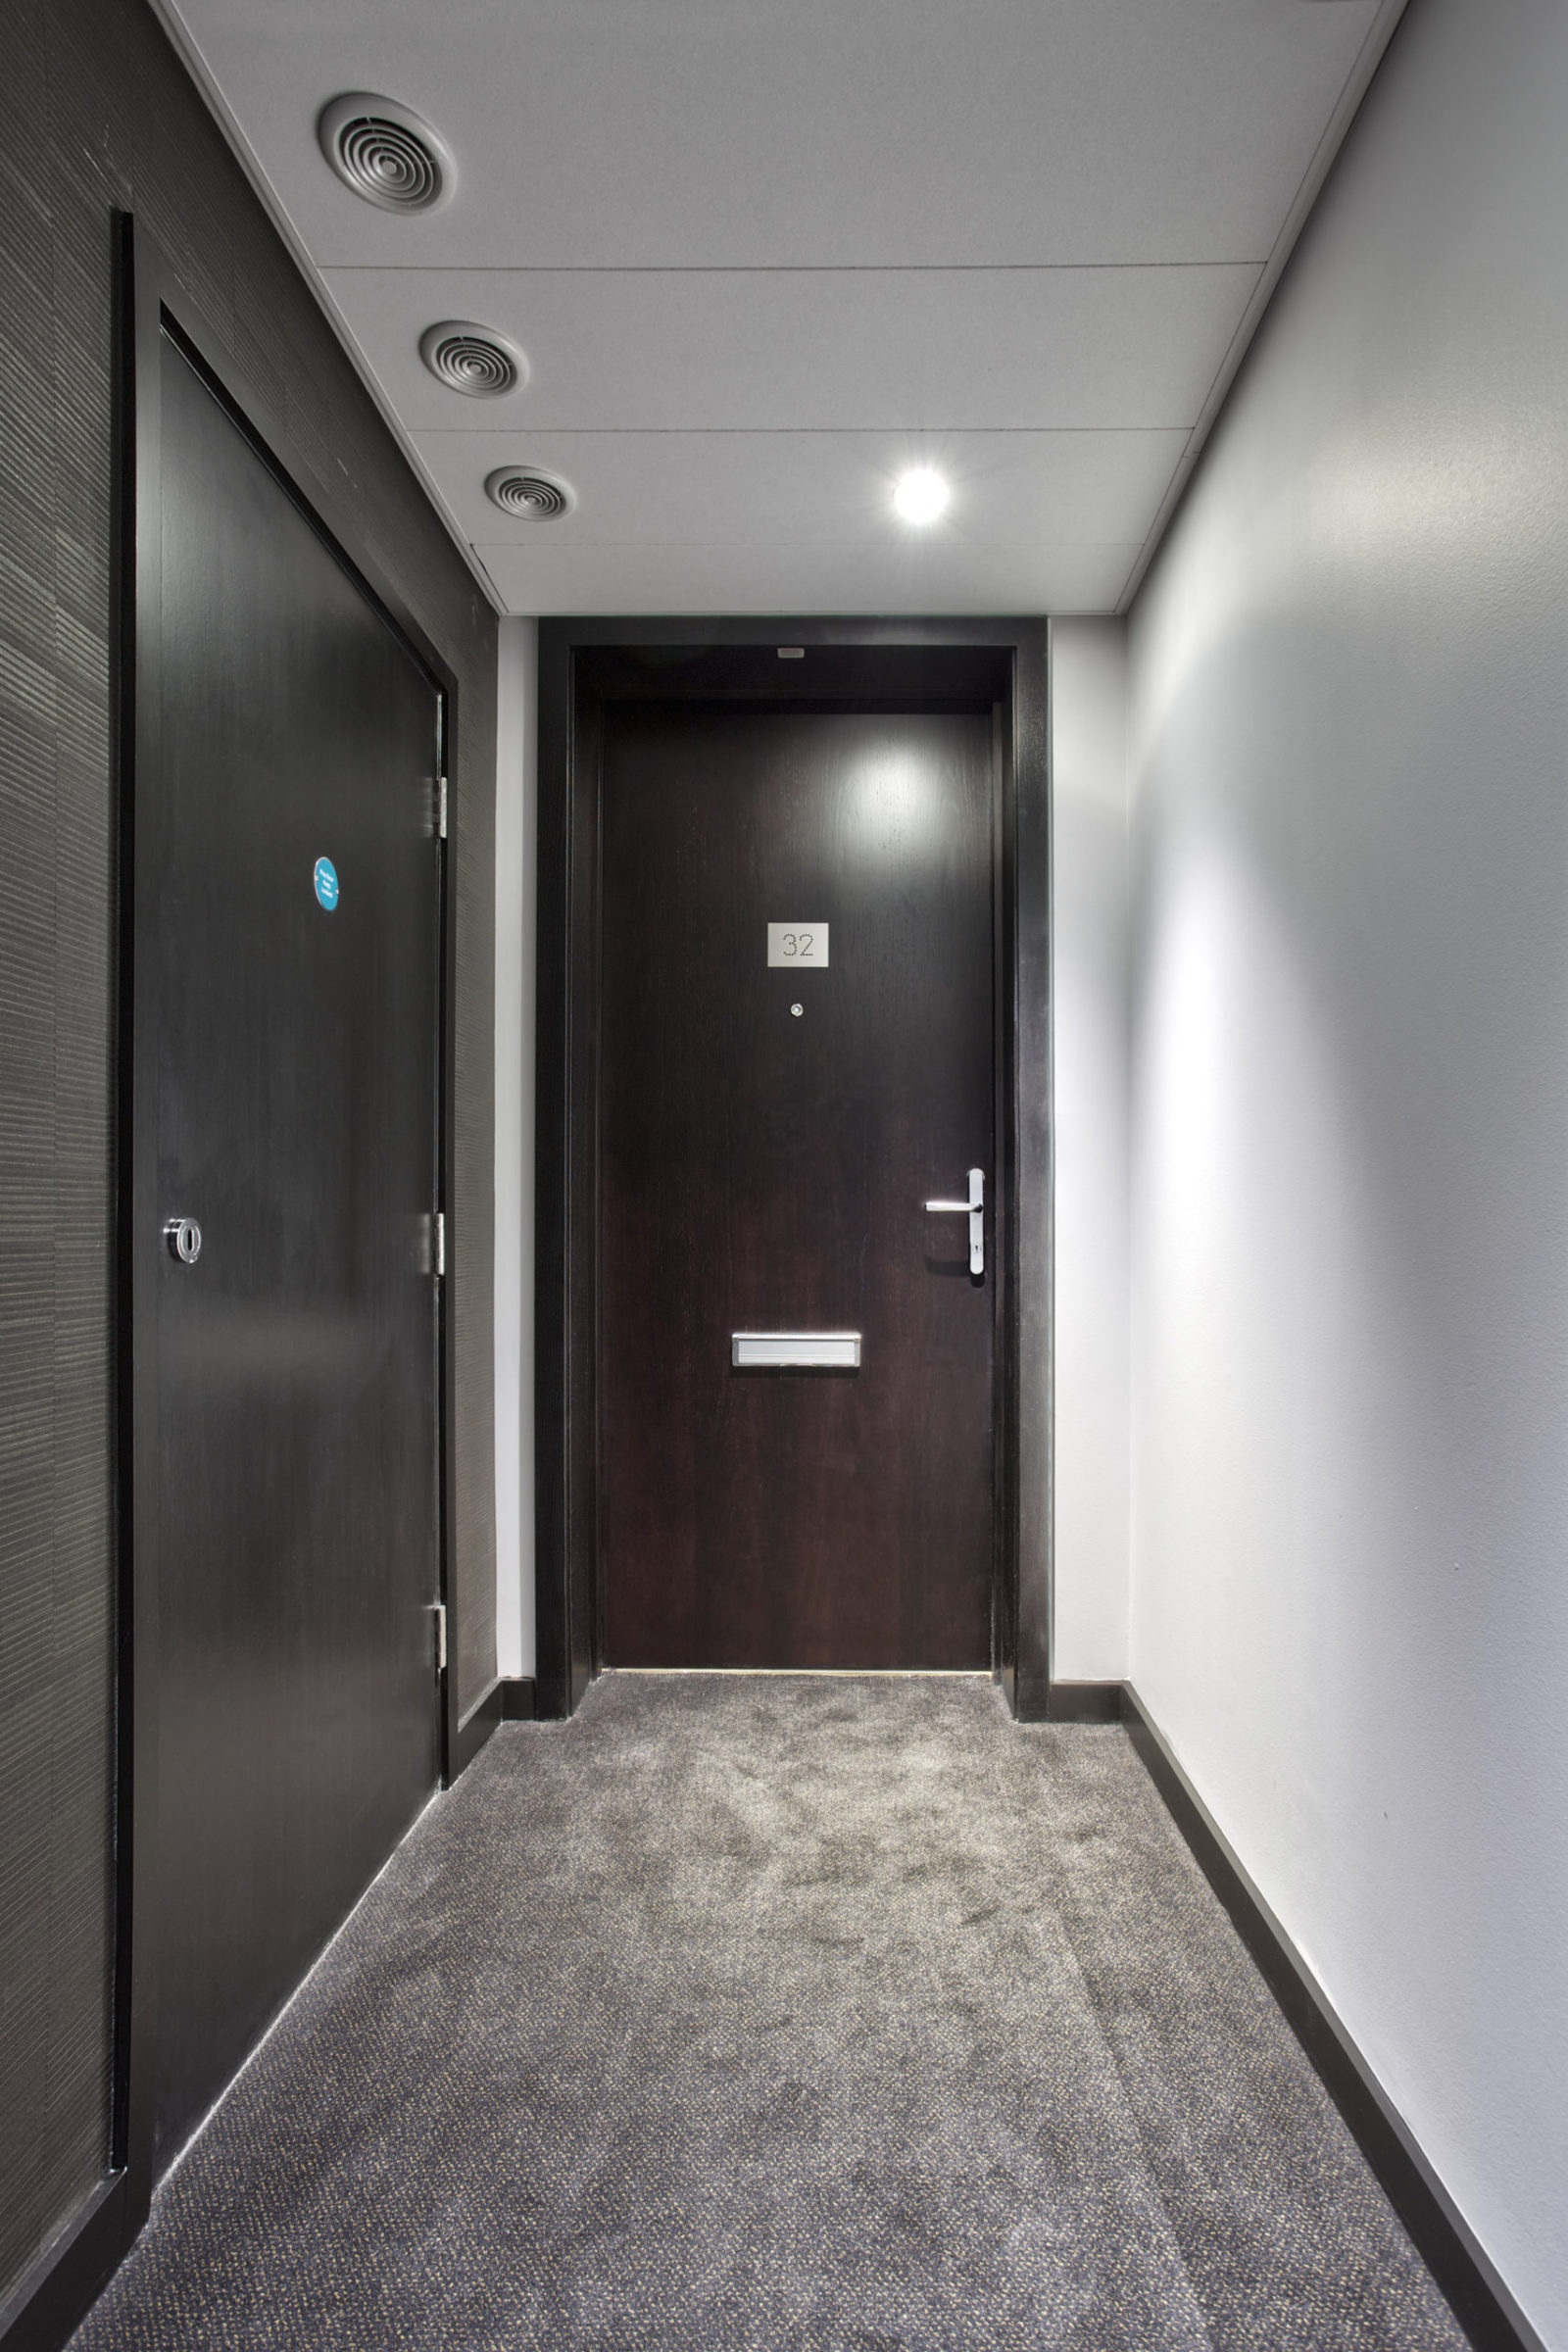 PAS 24 Secured by Design Doors for Parliament House